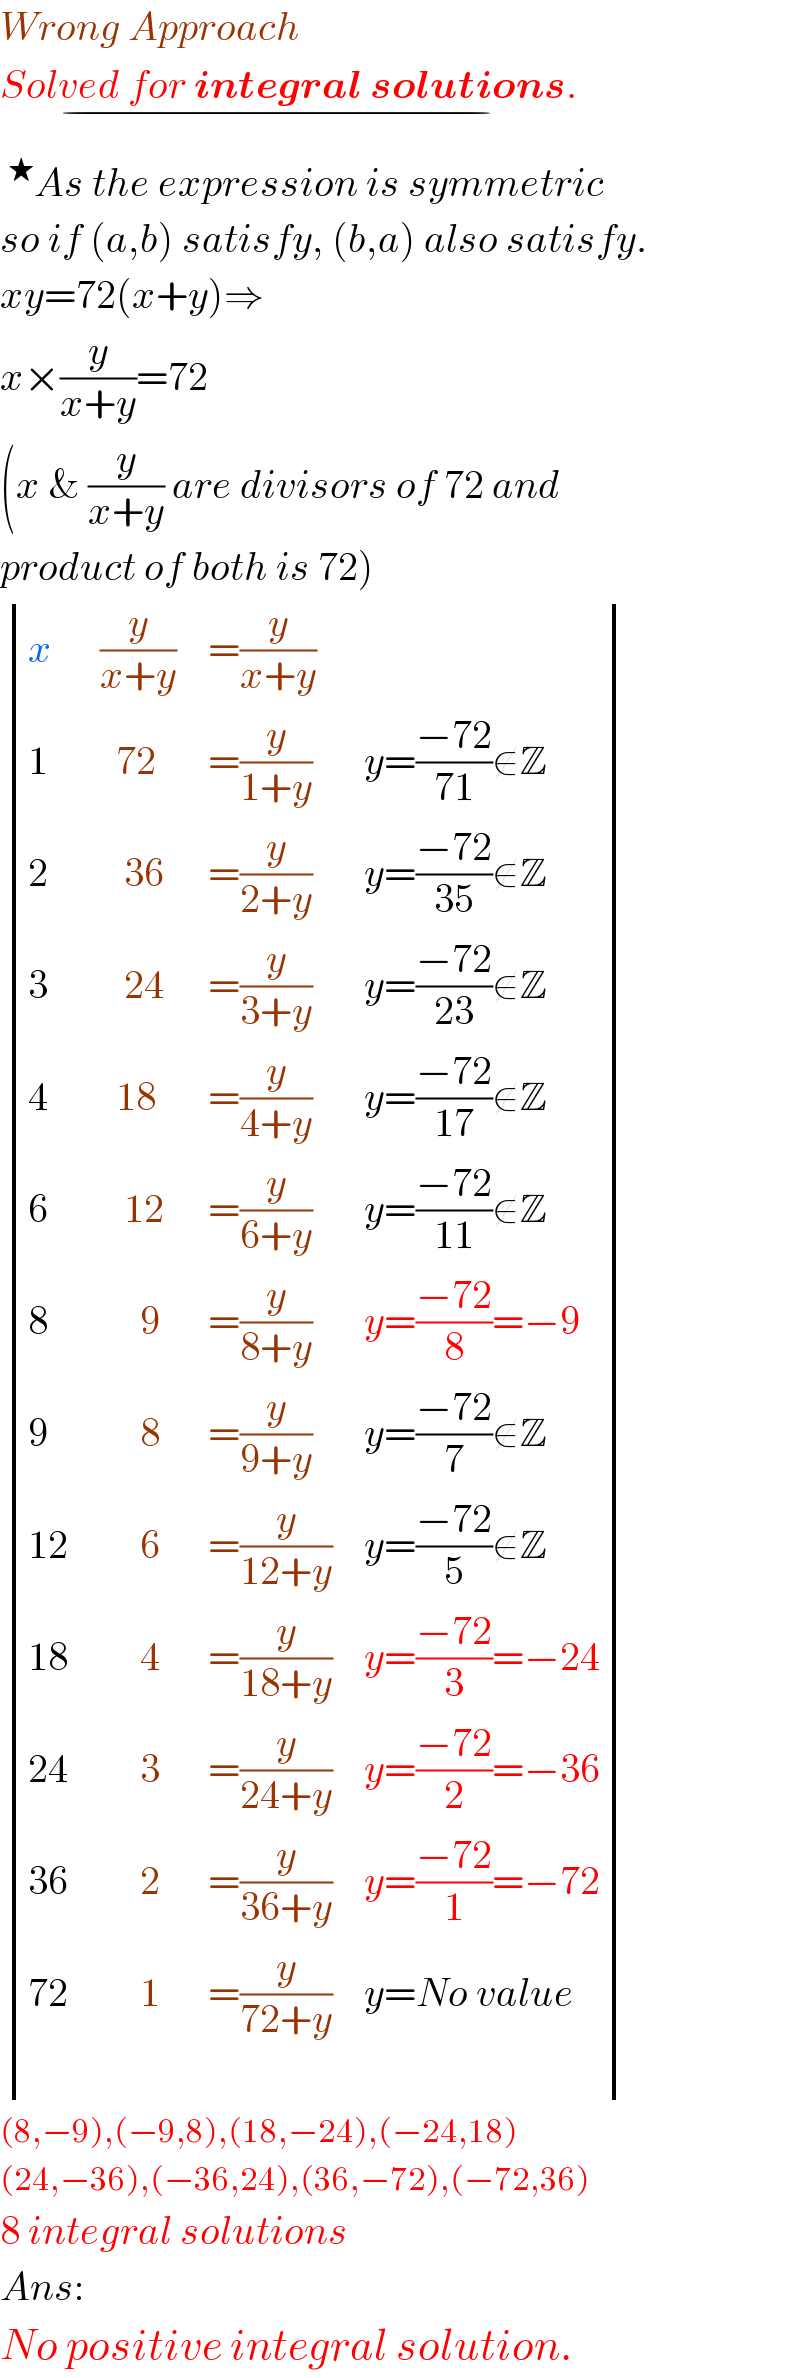 Wrong Approach  Solved for integral solutions._(−)   ^★ As the expression is symmetric  so if (a,b) satisfy, (b,a) also satisfy.  xy=72(x+y)⇒  x×(y/(x+y))=72  (x & (y/(x+y)) are divisors of 72 and  product of both is 72)   determinant ((x,(y/(x+y)),(=(y/(x+y))),),(1,(  72),(=(y/(1+y))),(y=((−72)/(71))∉Z)),(2,(   36),(=(y/(2+y))),(y=((−72)/(35))∉Z)),(3,(   24),(=(y/(3+y))),(y=((−72)/(23))∉Z)),(4,(  18),(=(y/(4+y))),(y=((−72)/(17))∉Z)),(6,(   12),(=(y/(6+y))),(y=((−72)/(11))∉Z)),(8,(     9),(=(y/(8+y))),(y=((−72)/8)=−9)),(9,(     8),(=(y/(9+y))),(y=((−72)/7)∉Z)),((12),(     6),(=(y/(12+y))),(y=((−72)/5)∉Z)),((18),(     4),(=(y/(18+y))),(y=((−72)/3)=−24)),((24),(     3),(=(y/(24+y))),(y=((−72)/2)=−36)),((36),(     2),(=(y/(36+y))),(y=((−72)/1)=−72)),((72),(     1),(=(y/(72+y))),(y=No value)))  (8,−9),(−9,8),(18,−24),(−24,18)  (24,−36),(−36,24),(36,−72),(−72,36)  8 integral solutions  Ans:  No positive integral solution.  